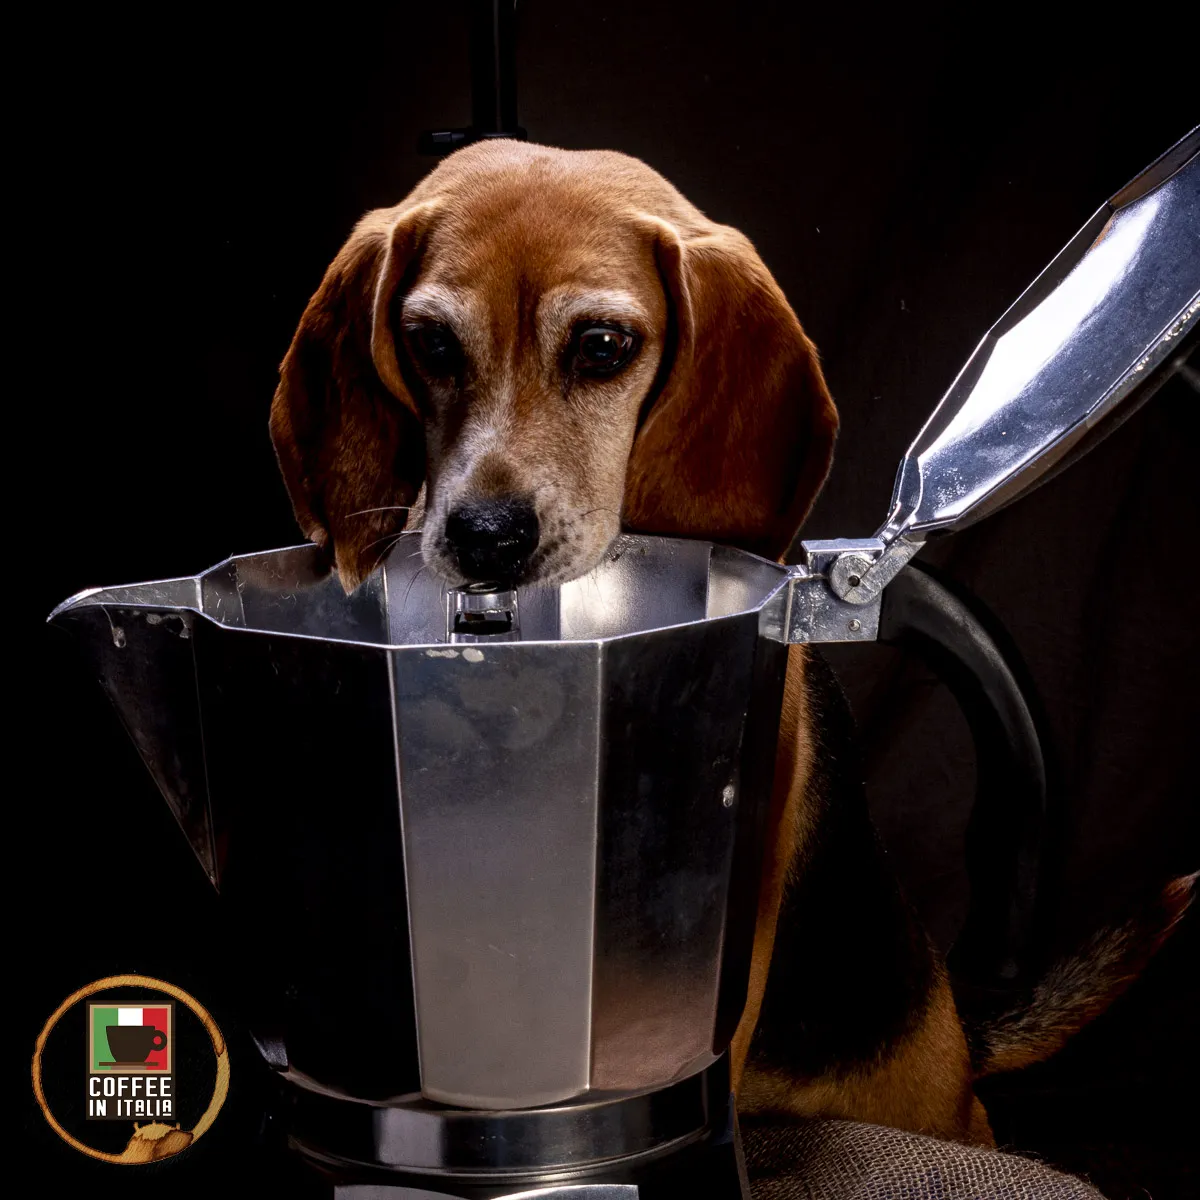 What Is Special About Bialetti - My Dog Wants Coffee